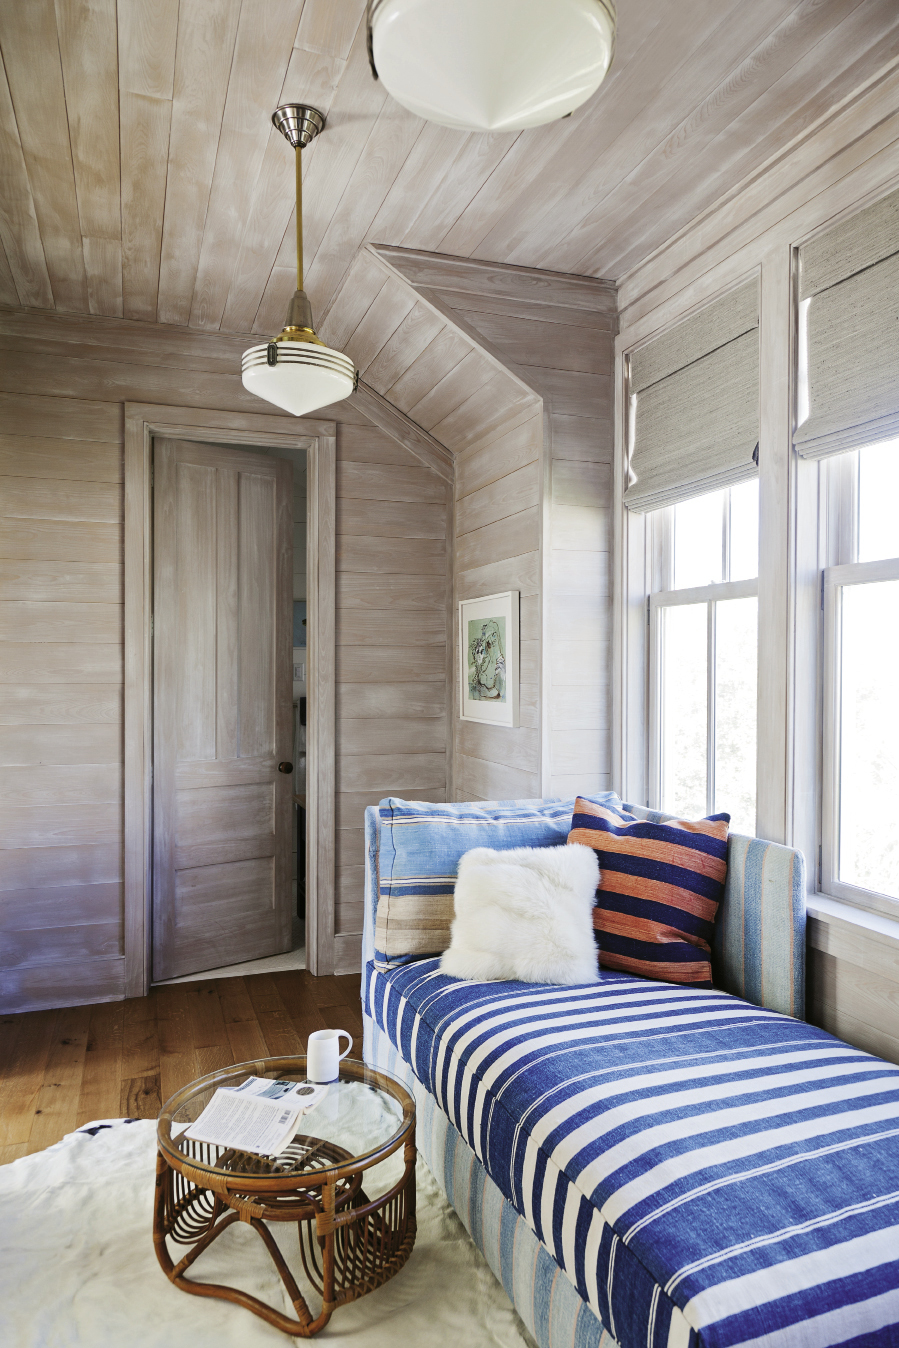 Cozy bedrooms and bunks abound to fit in plenty of visitors, including a double-duty sleeper bench upholstered in a vintage dhurrie in the cedar-lined “office”